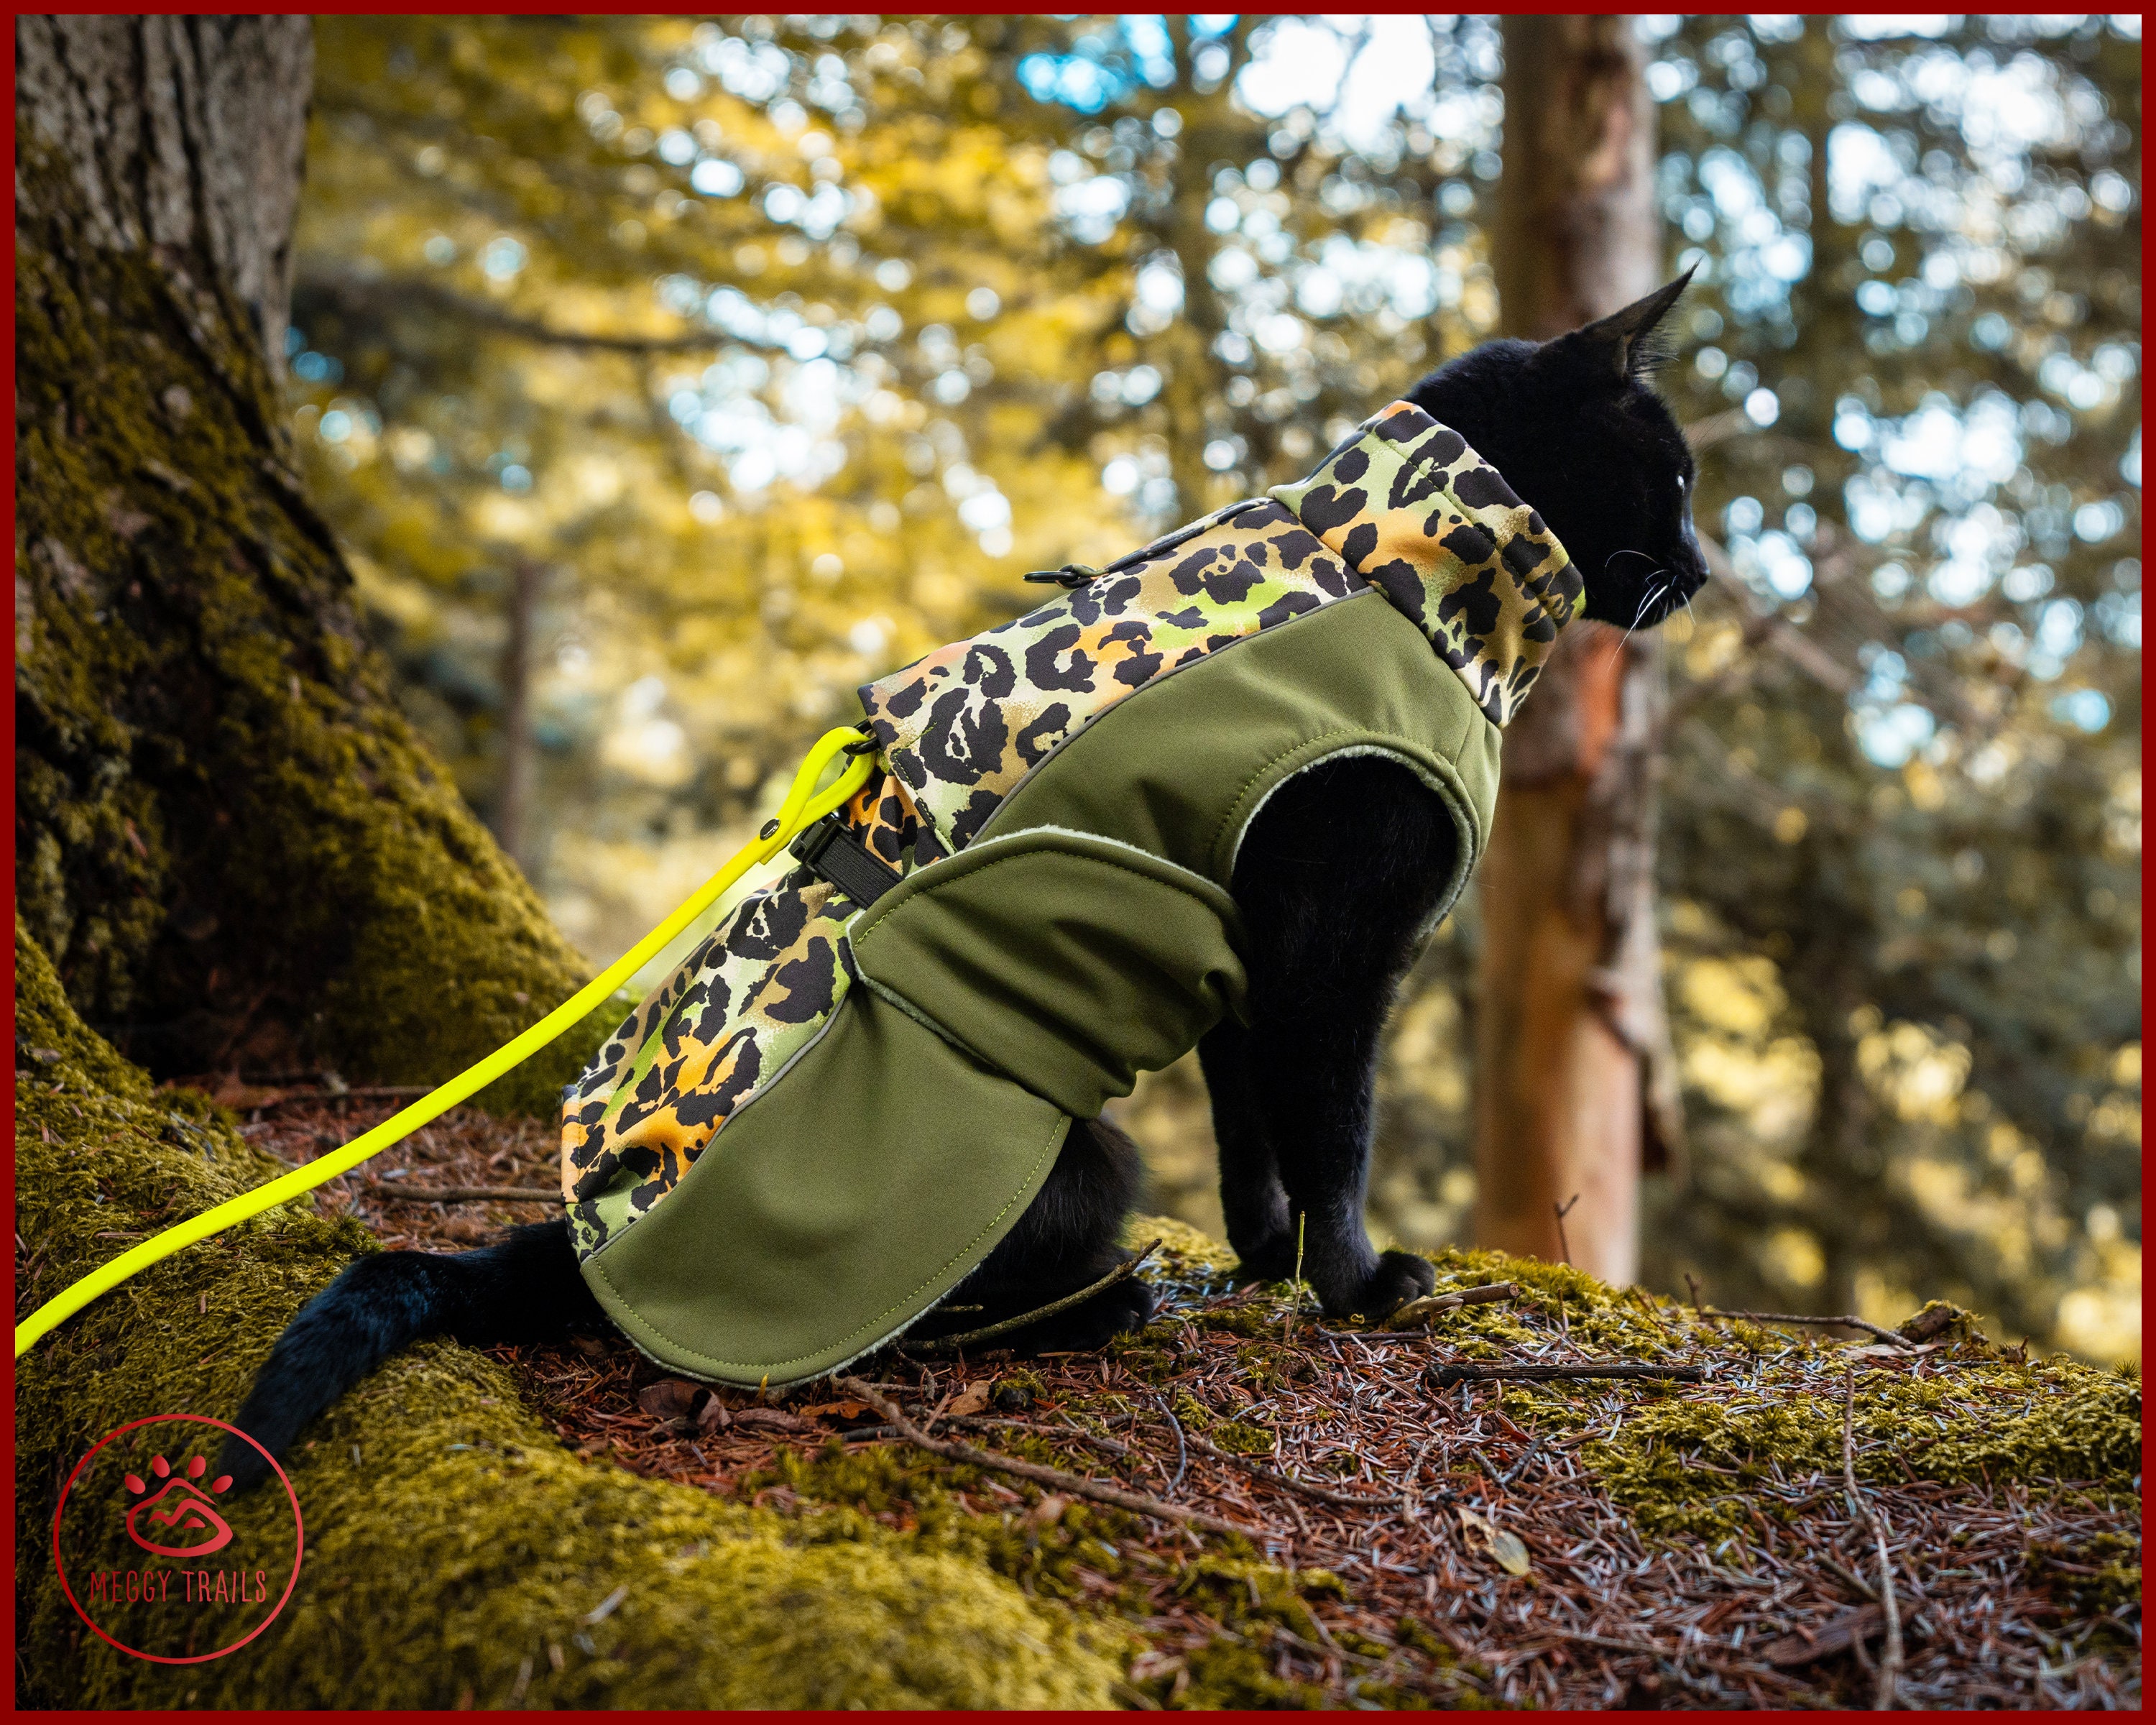 EXTRA WARM Jacket for Adventure Cat Three Layer Cat Winter 